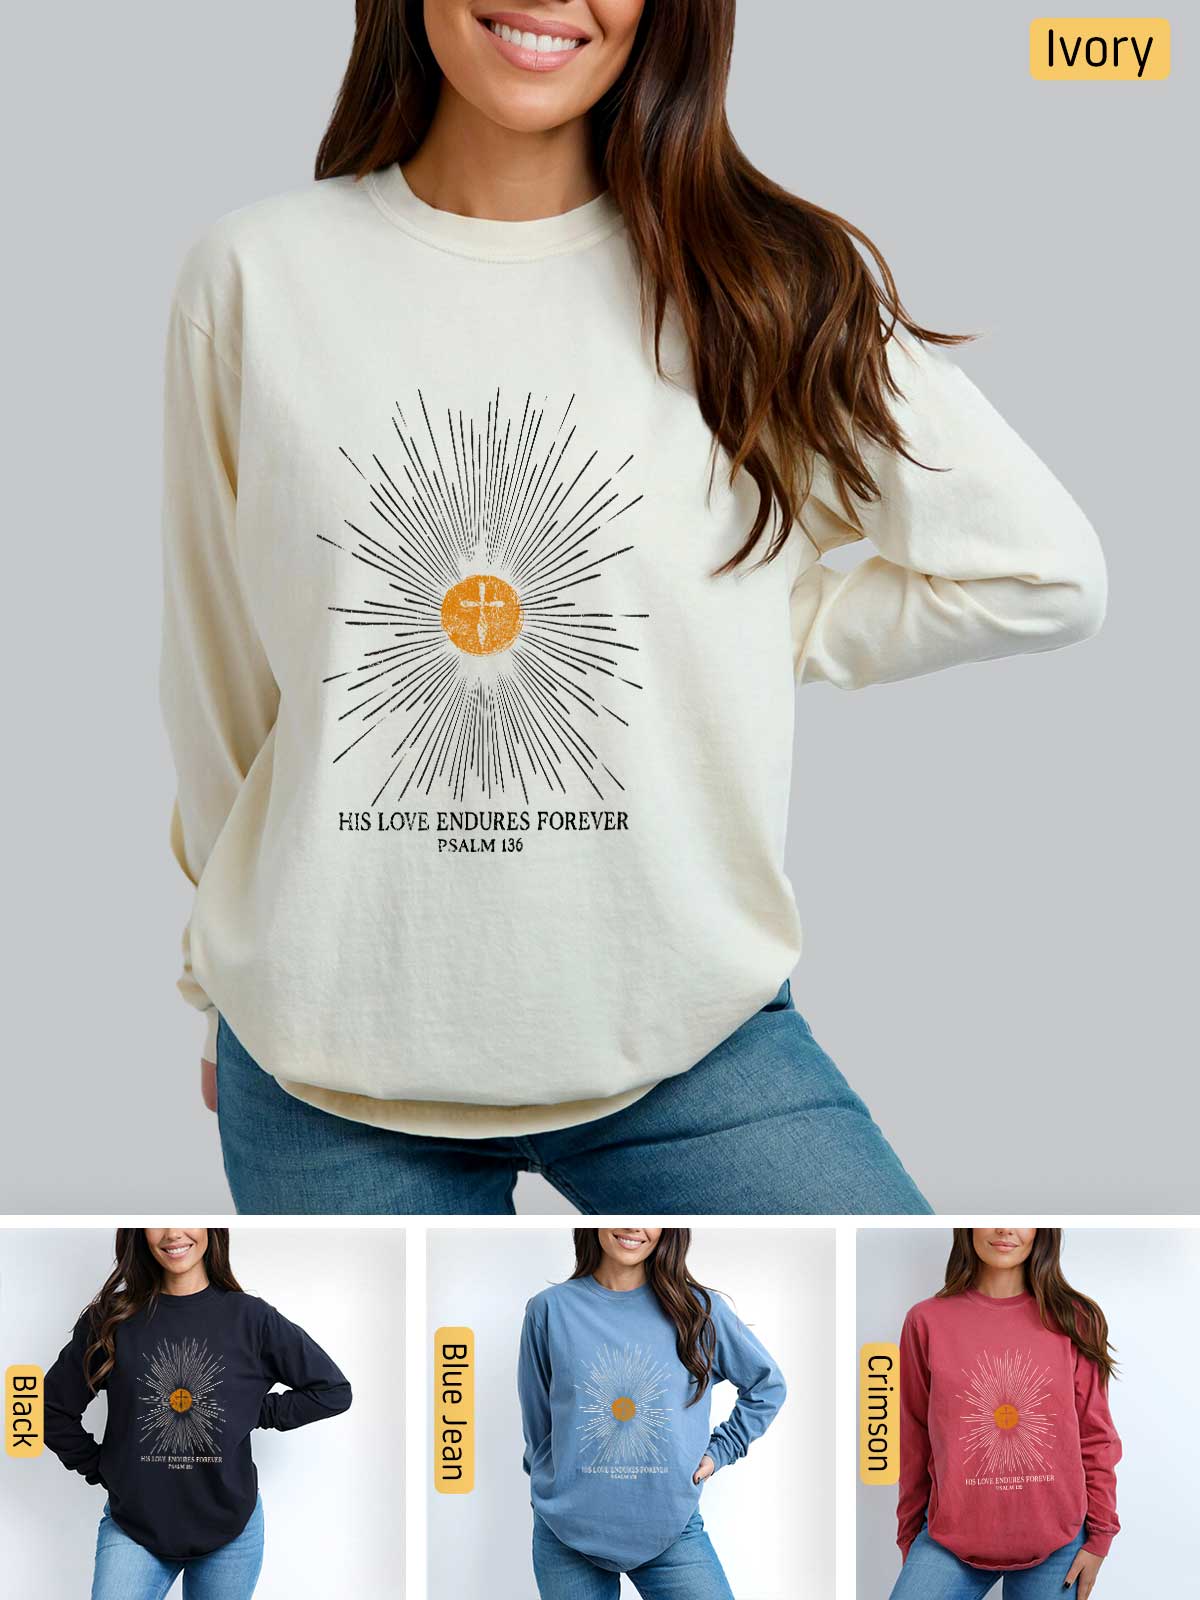 a woman wearing a white sweatshirt with a sun graphic on it